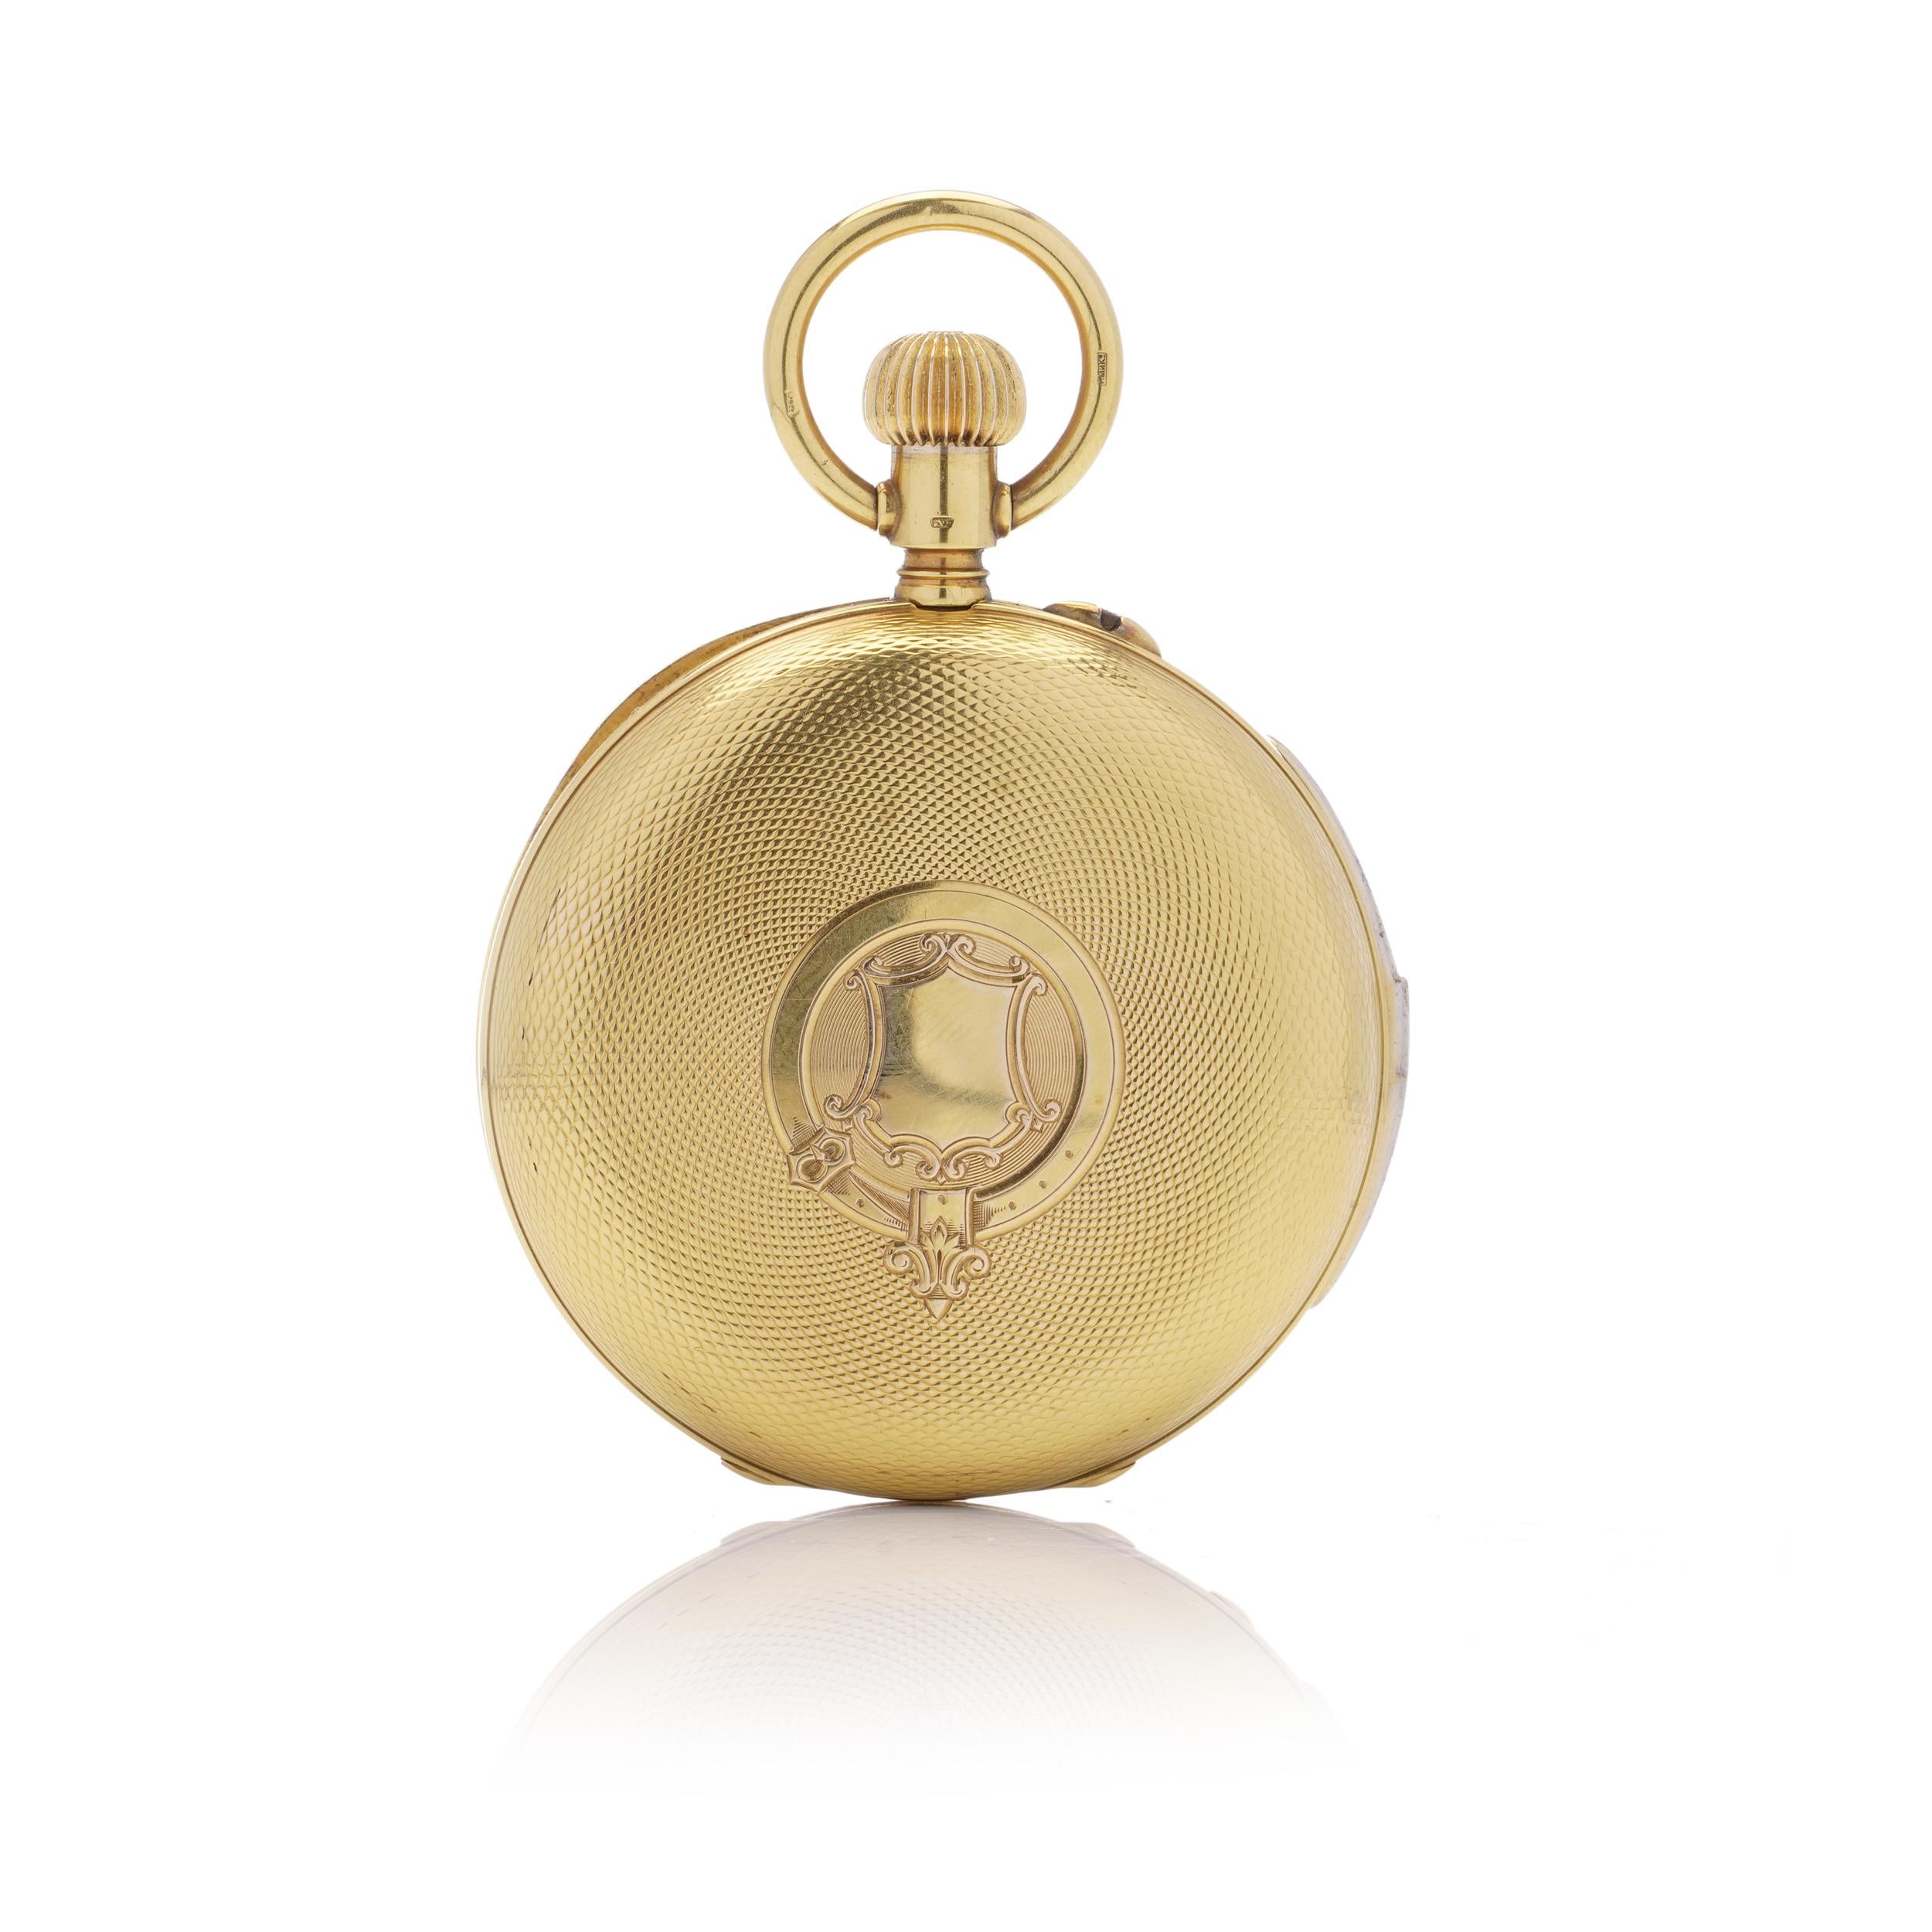 Hy Moser & Cie antique 14kt yellow gold quarter-repeater full hunter case keyless pocket watch.
The watch features an engine-turned design with a plain cartouche shaped like a shield on the front, surrounded by circle and scrolls in the centre. 
The